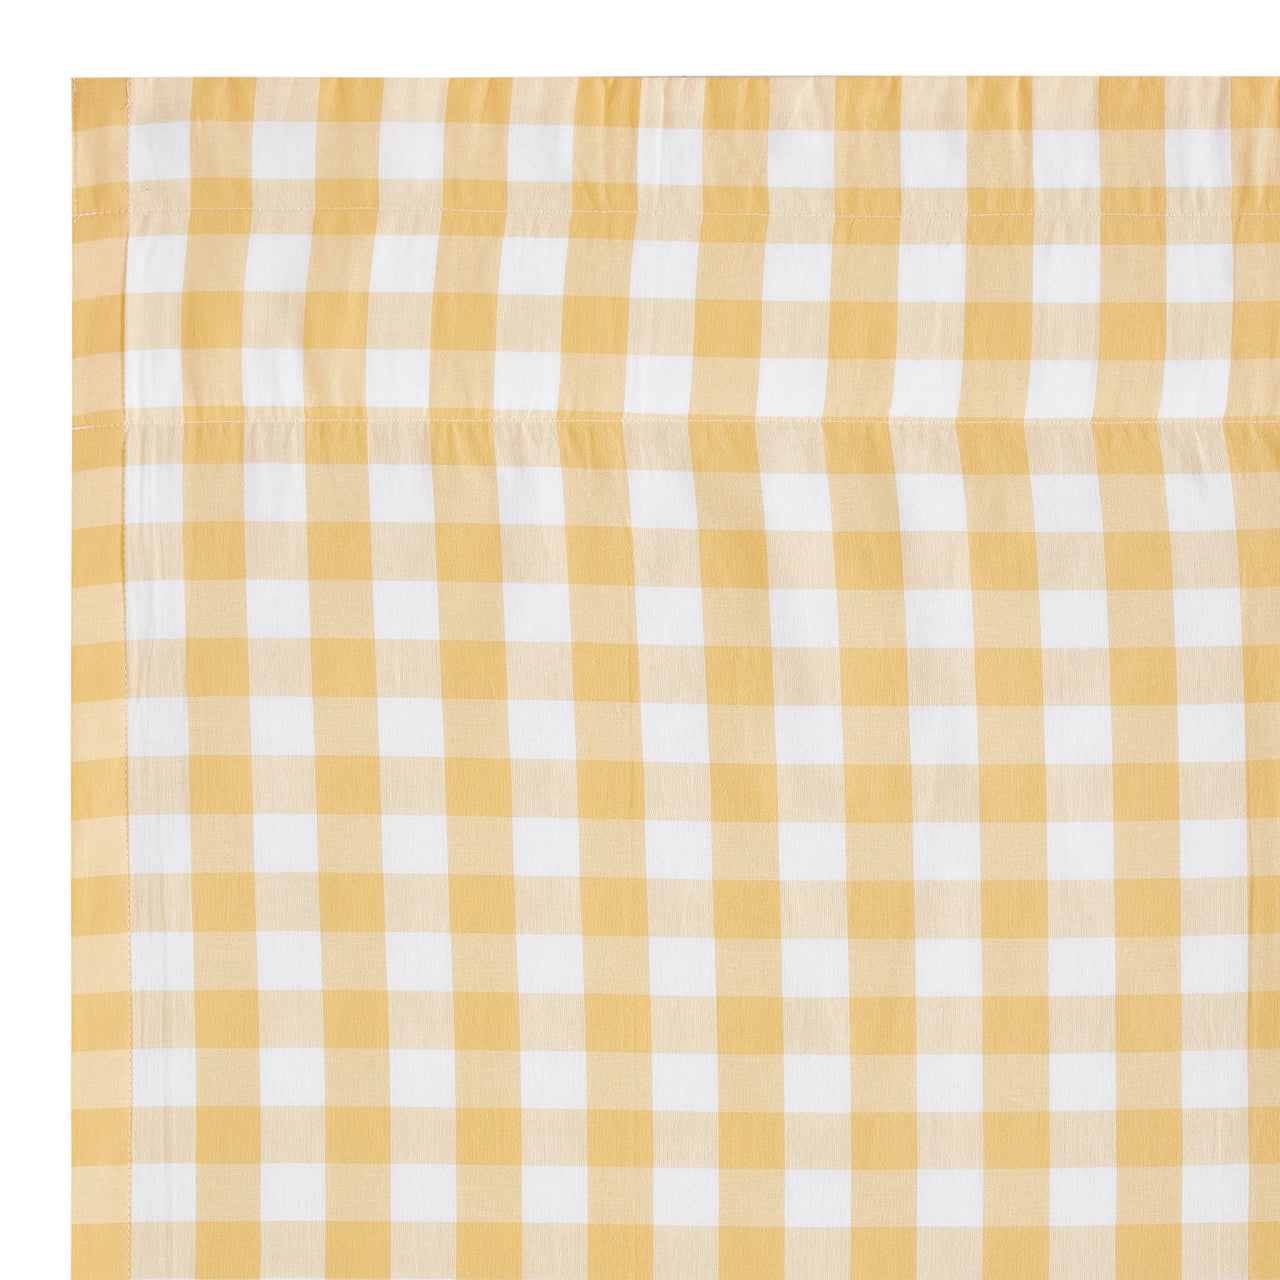 Annie Buffalo Yellow Check Short Panel Curtain Set of 2 63"x36" VHC Brands